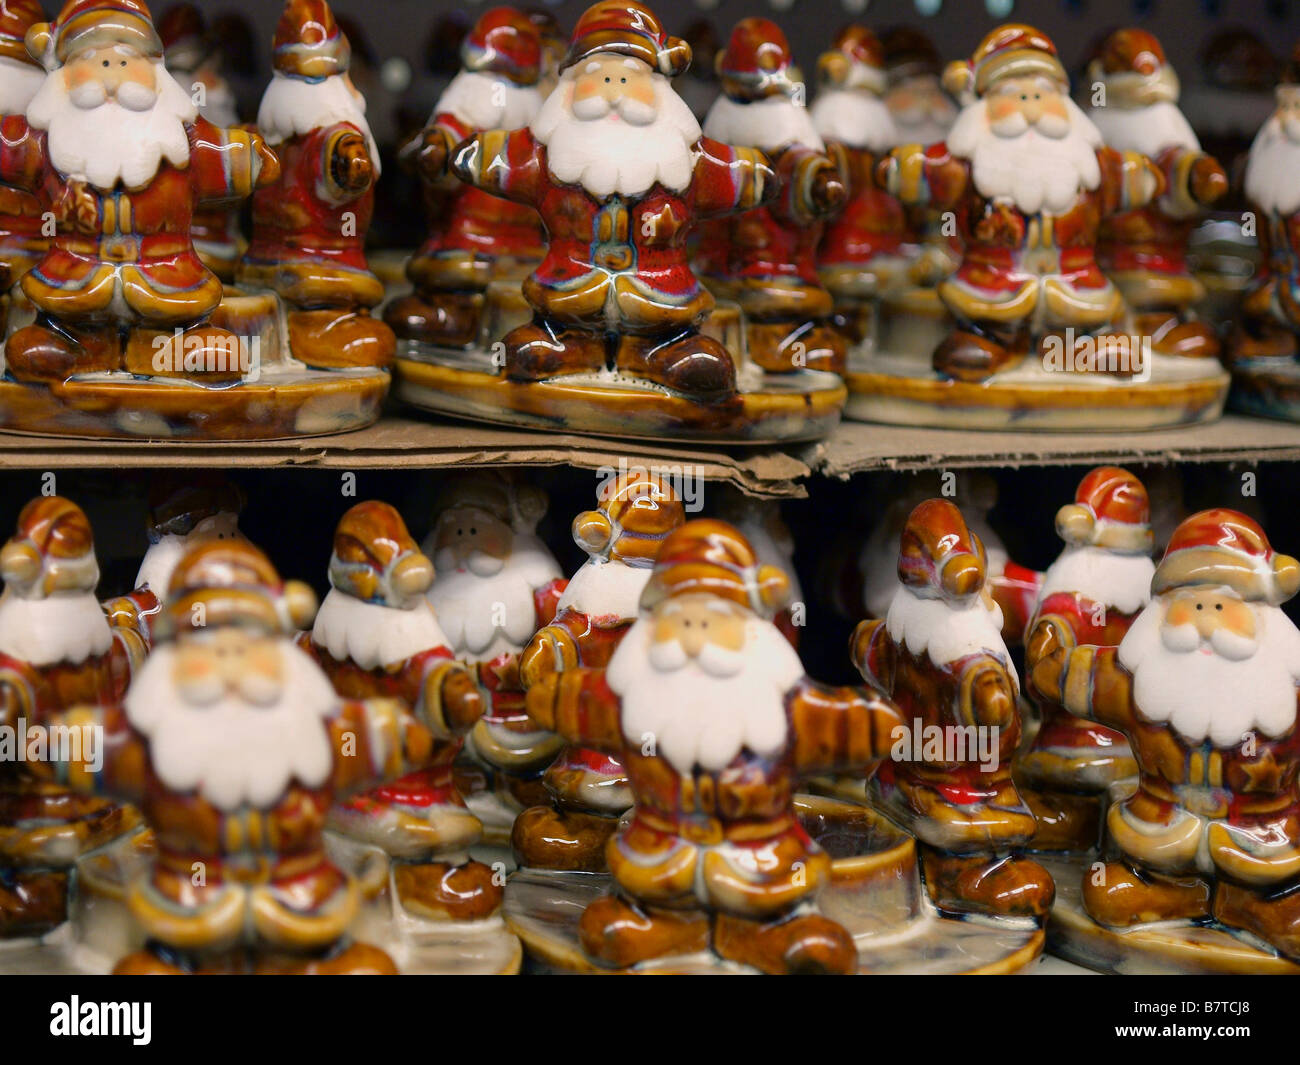 Santa Claus figures on display for retail sale on a cardboard shelf. Stock Photo